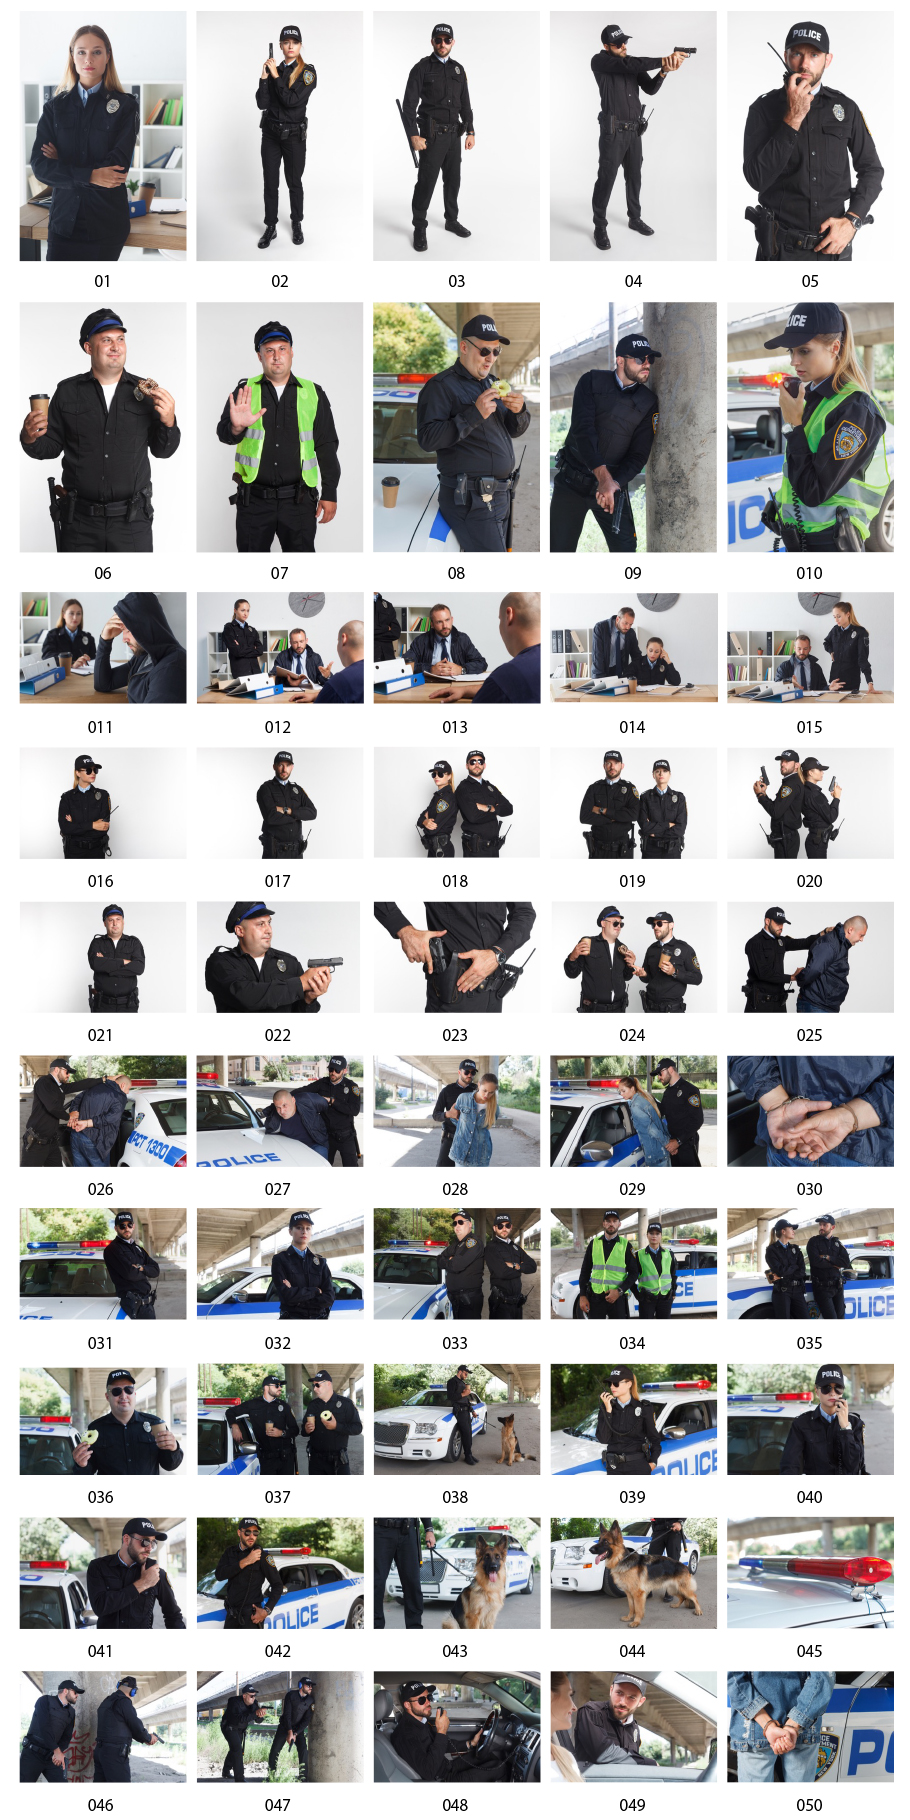 Police official photographic material